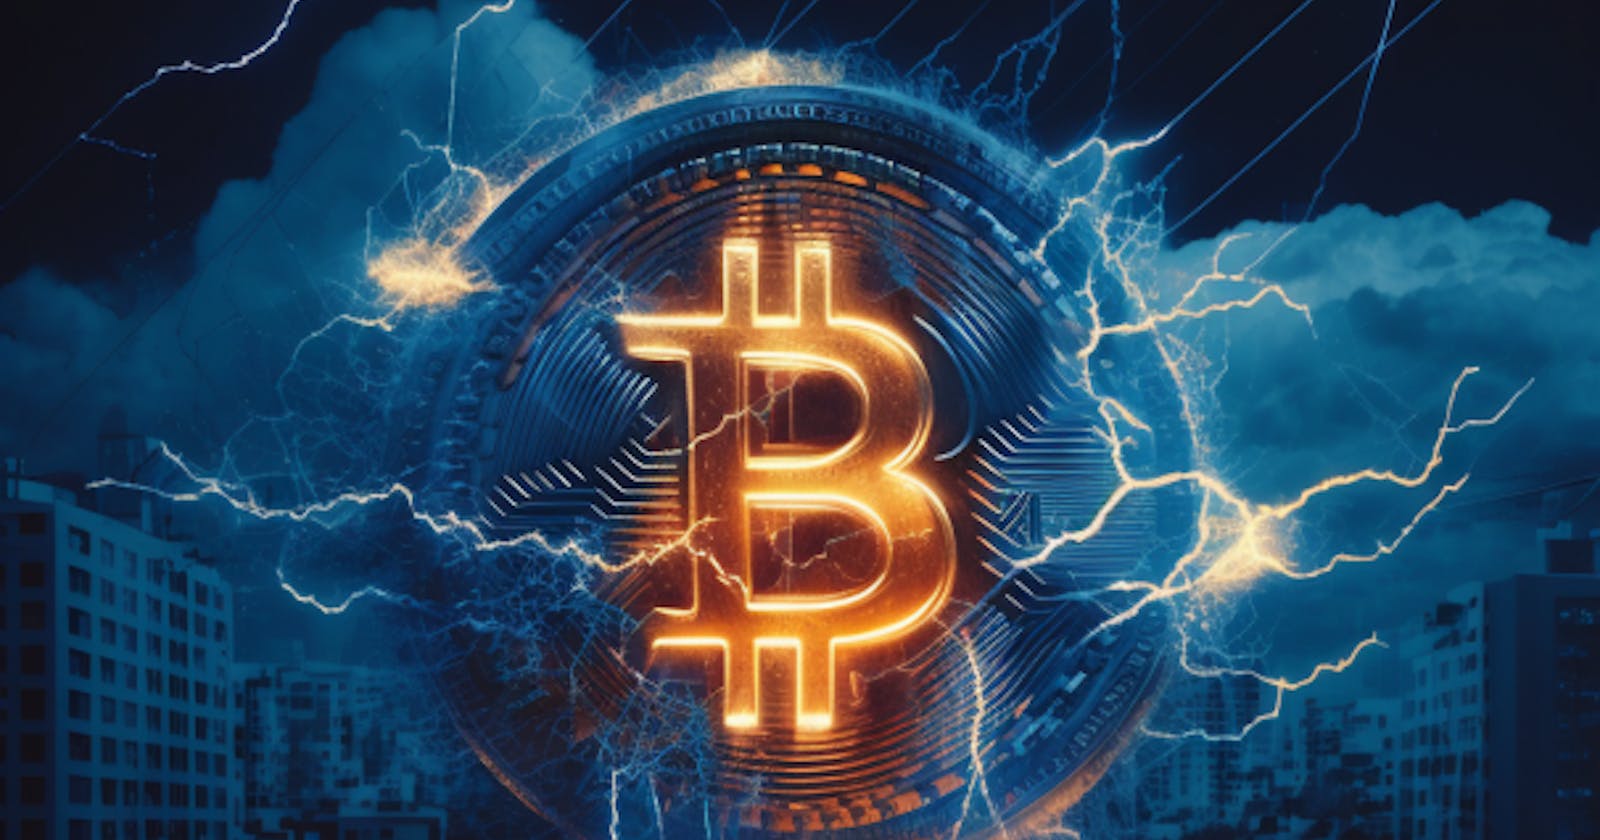 DECODING THE BITCOIN'S LAYER 2 PAYMENT SOLUTION i.e. THE LIGHTNING NETWORK.